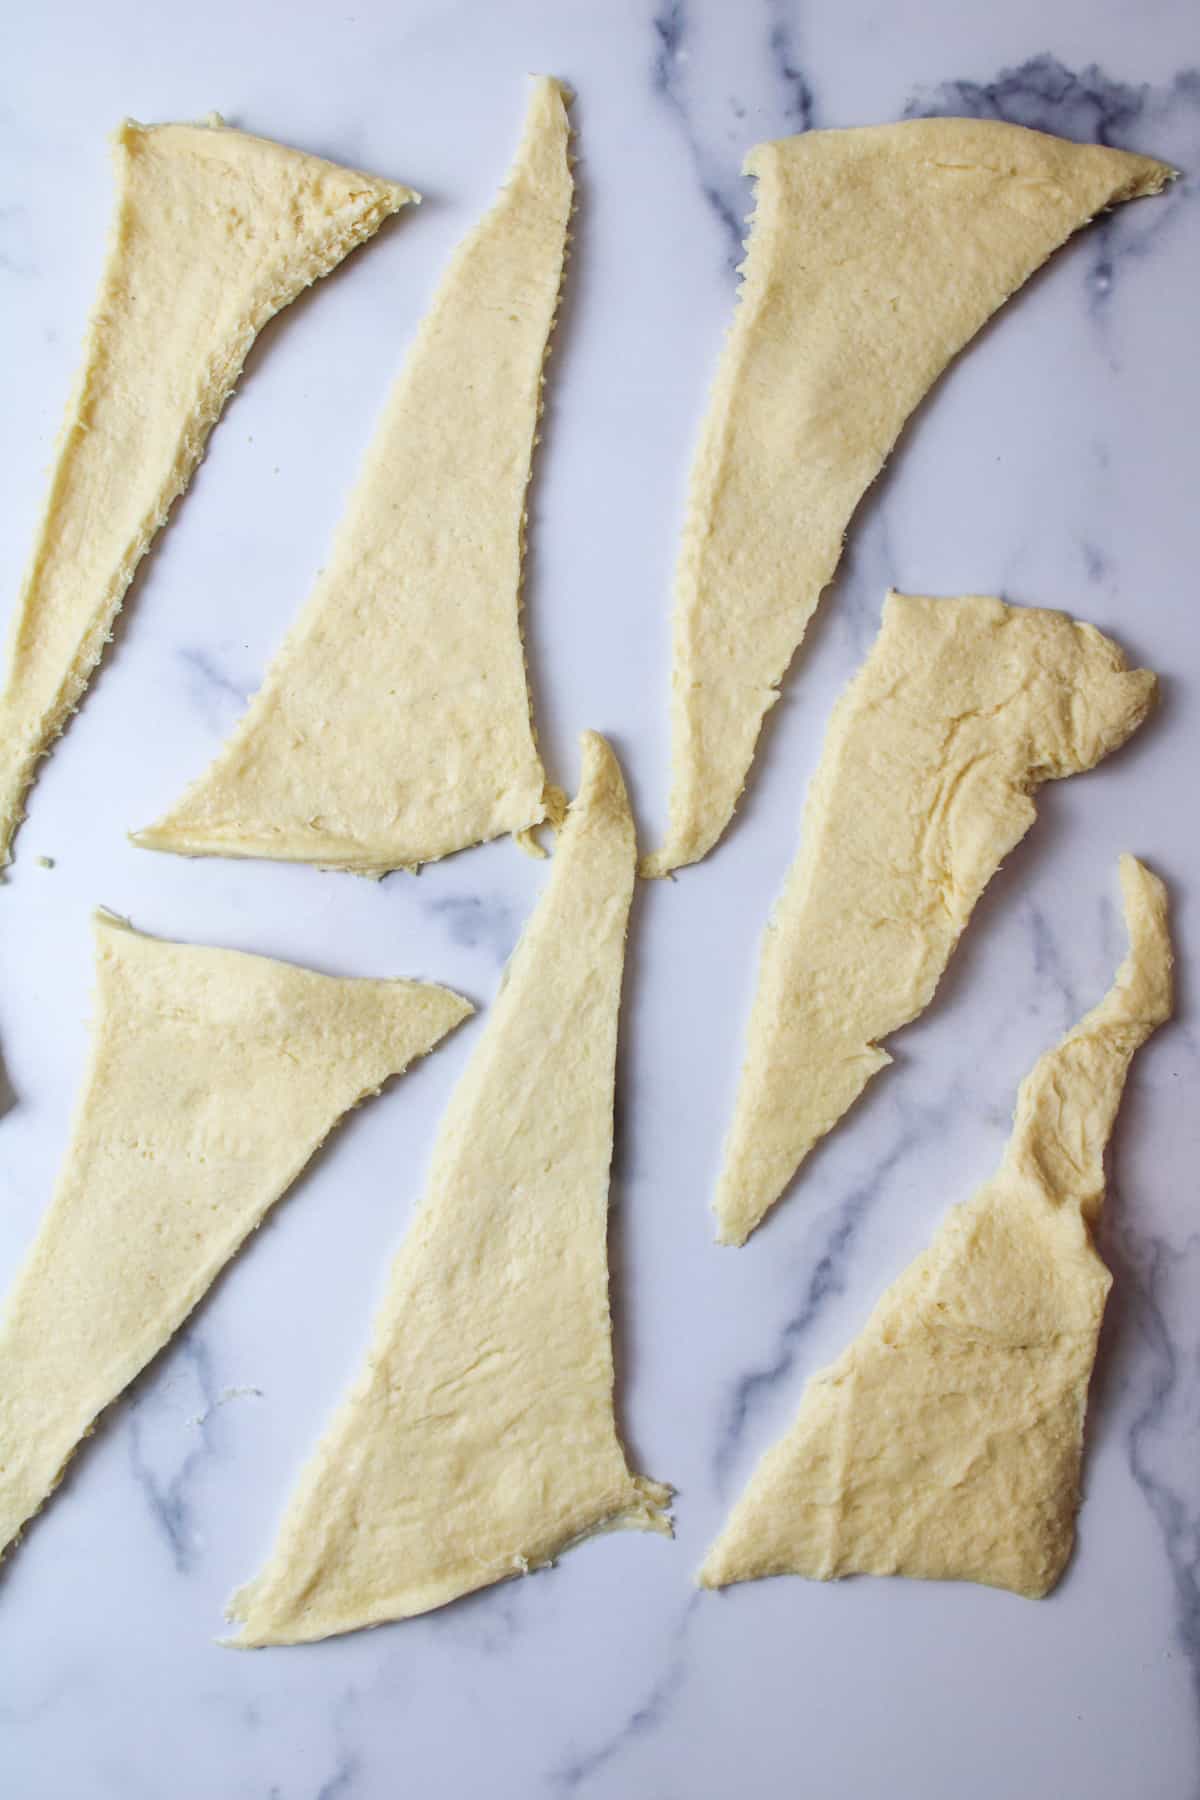 unrolled triangles of crescent roll dough.